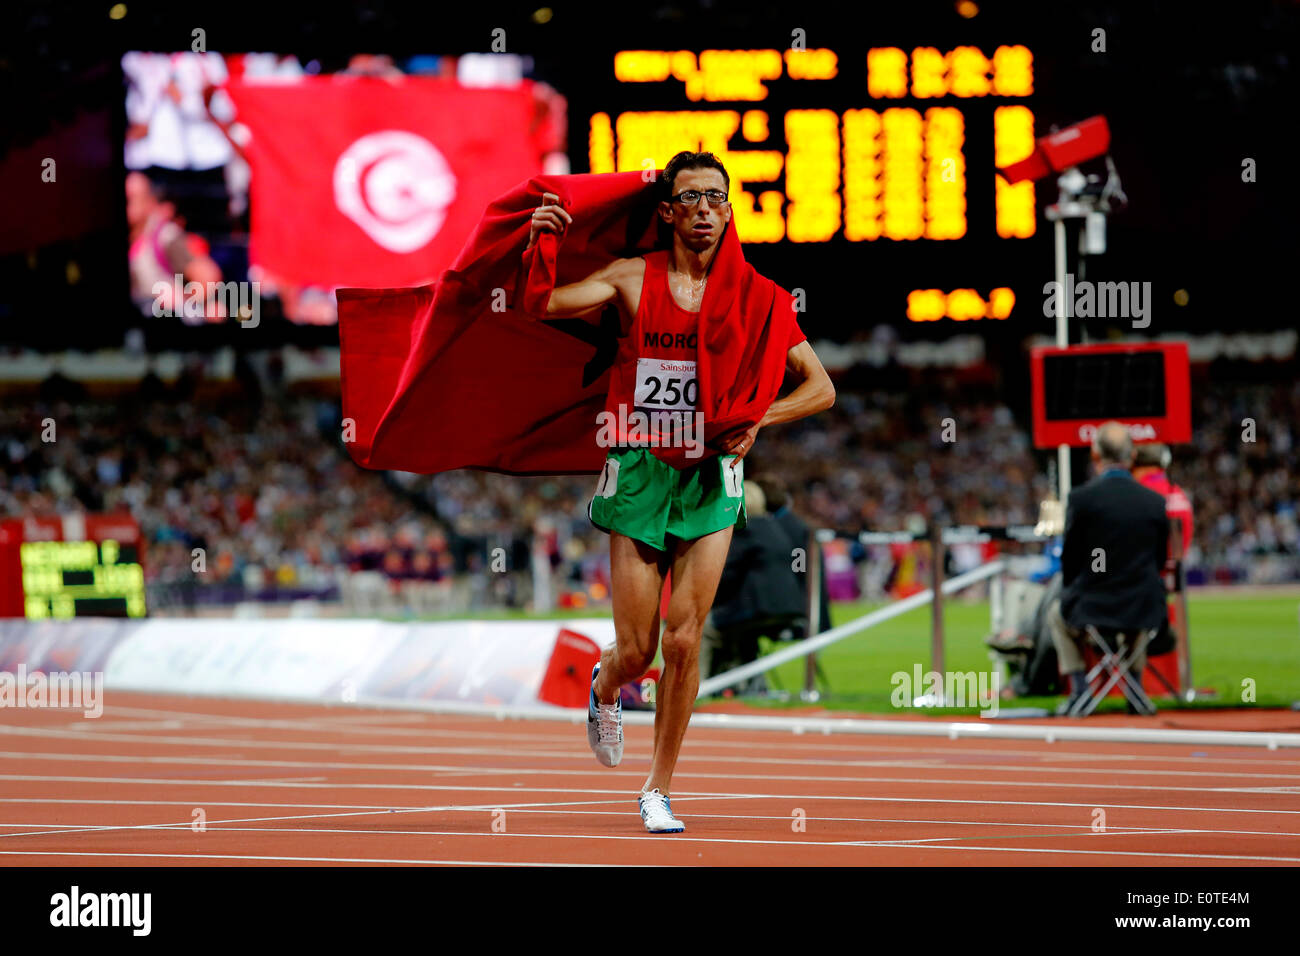 El Amin Chentouf of Morocco celebrates winning gold following the men's 5000m - T12 final at the Olympic Stadium during the London 2012 Paralympic Games, London, Britain, 03 September 2012. Stock Photo